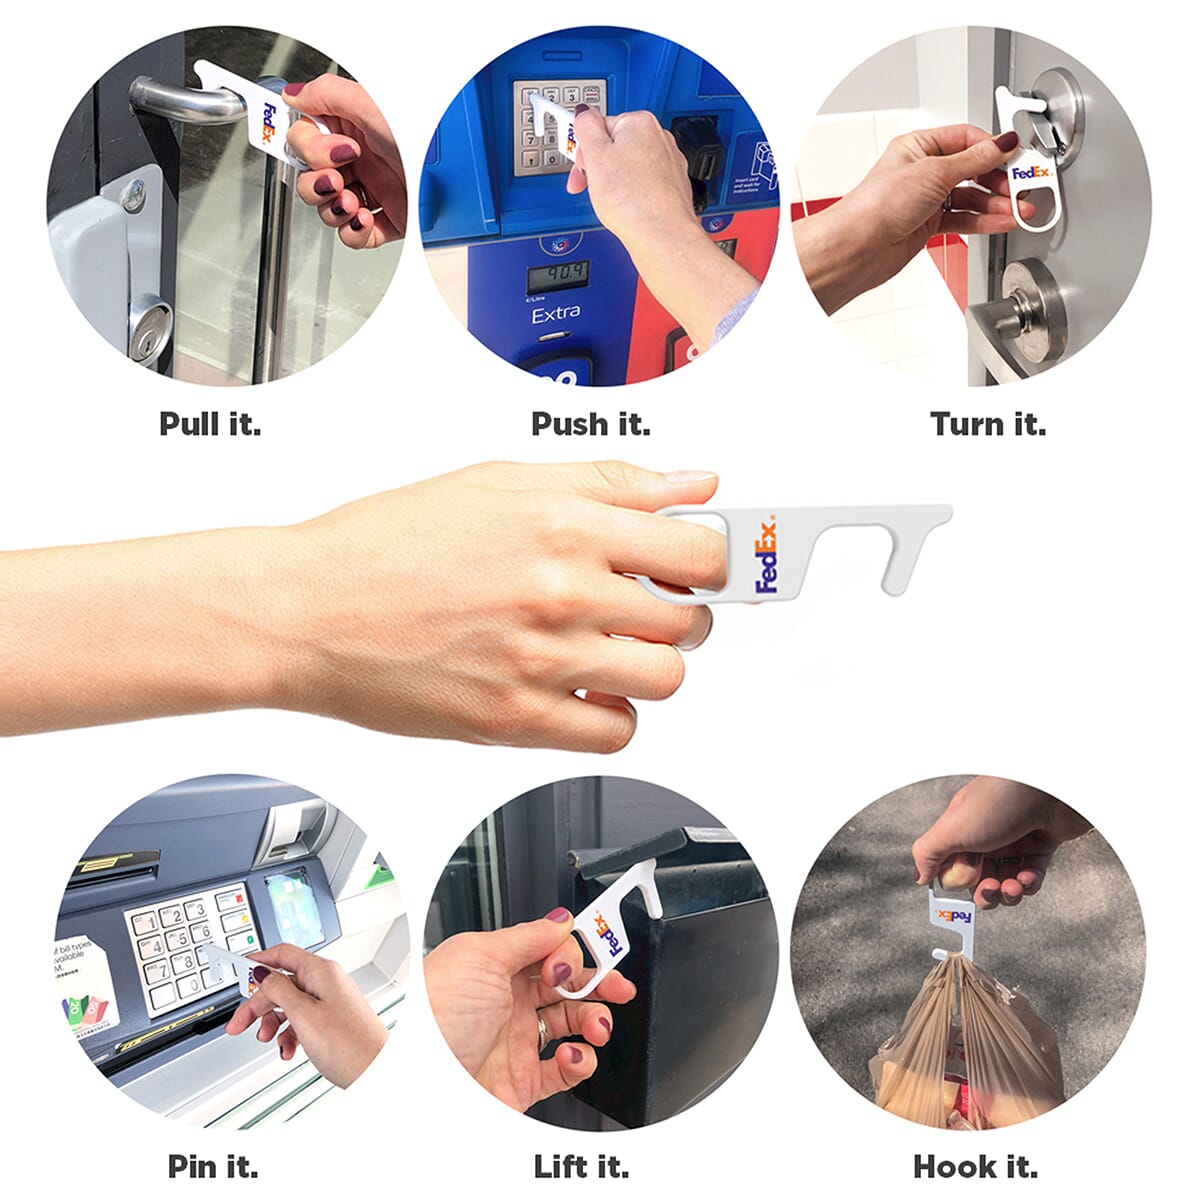 No touch safety tool to avoid germs